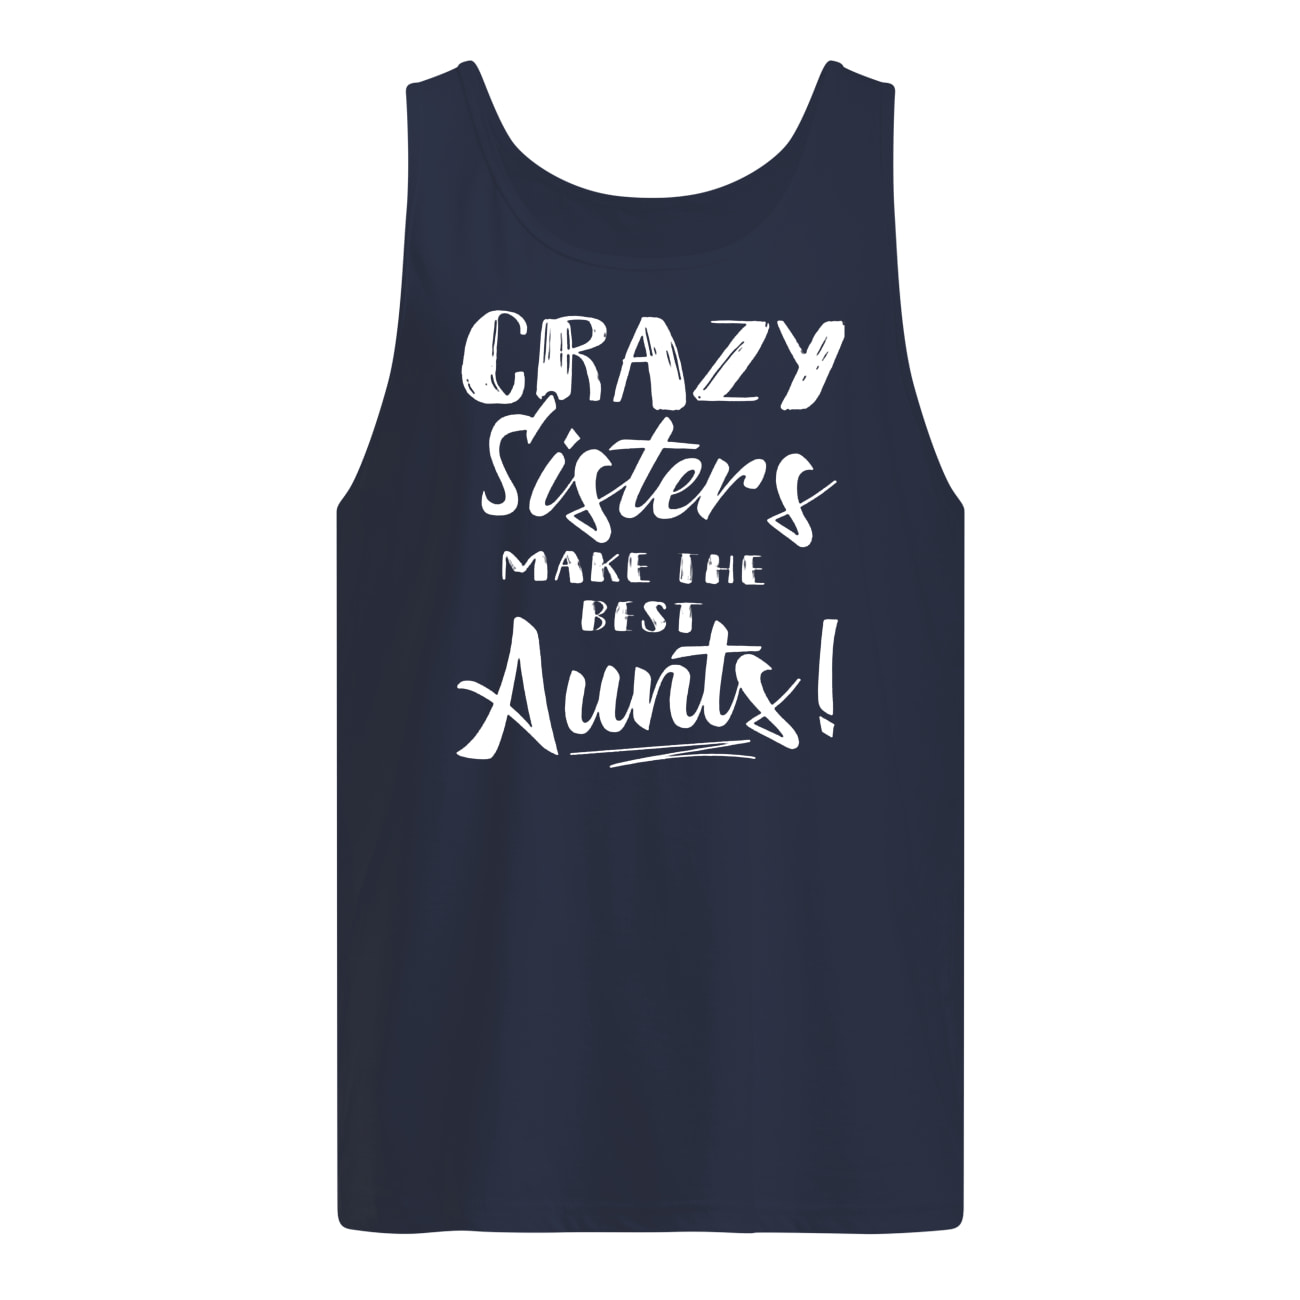 Crazy sisters make the best aunts tank top